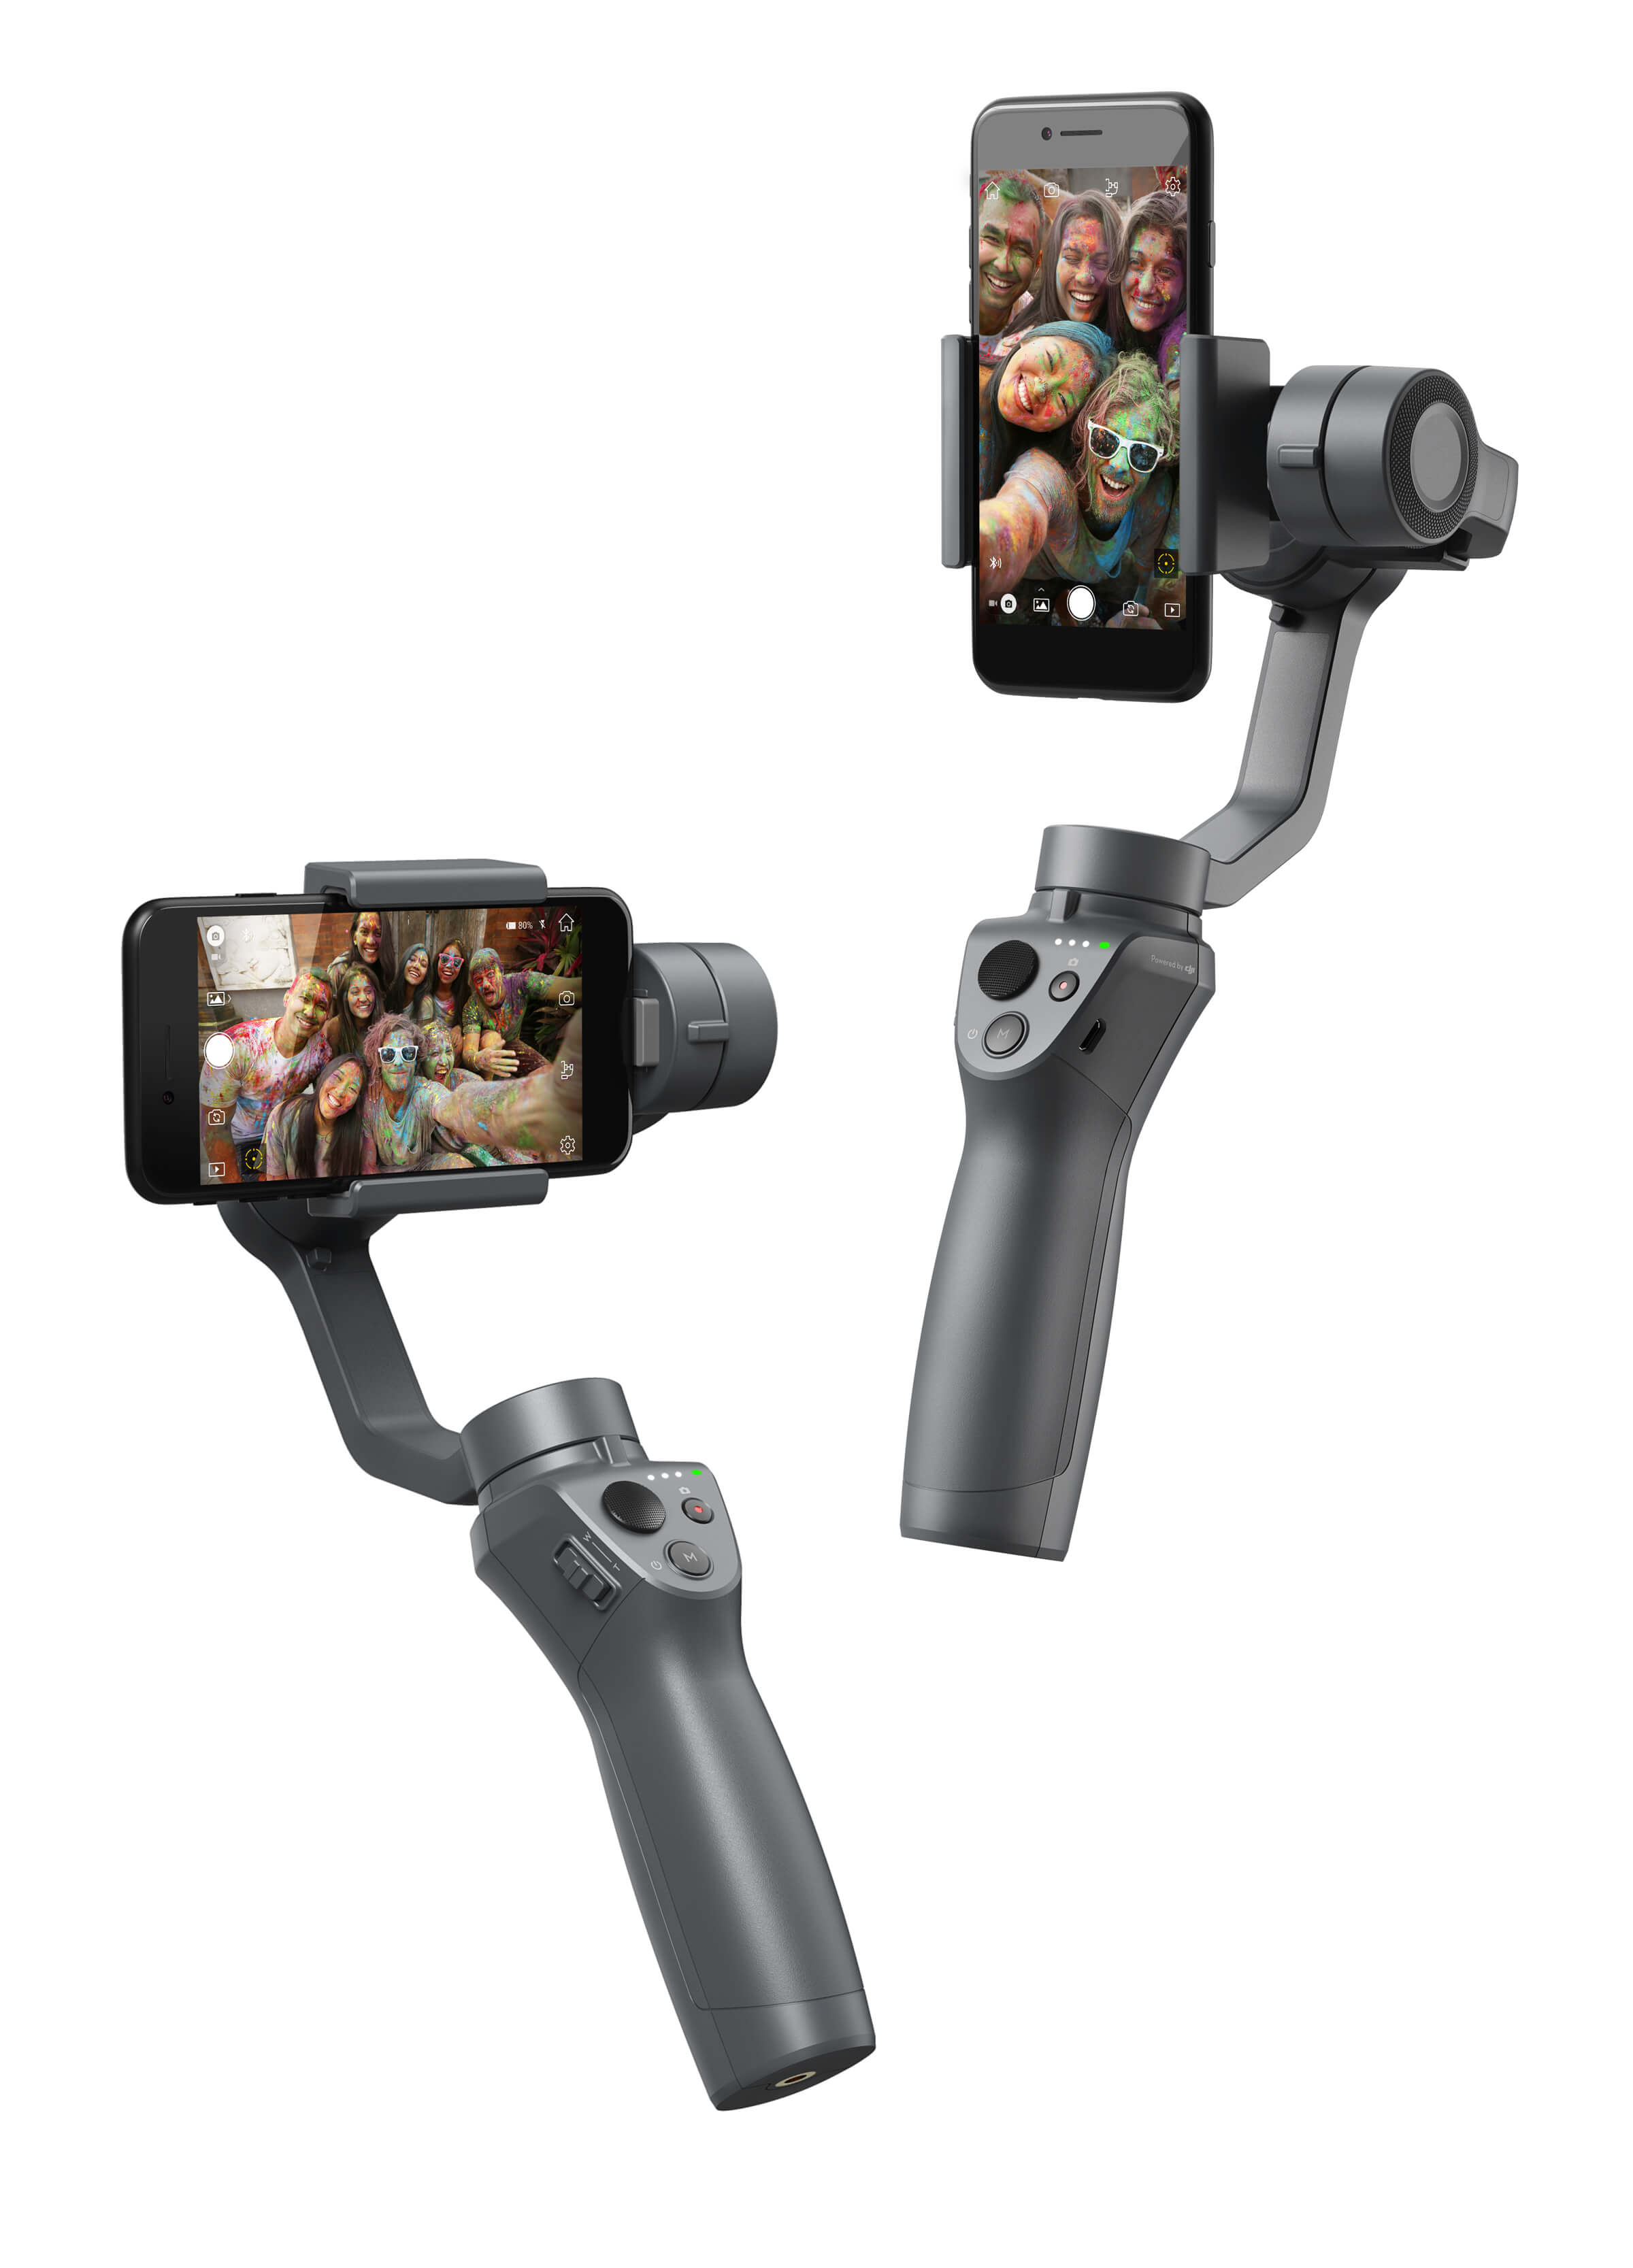 CES 2018: DJI's new handheld gimbals announced. Ronin-S & updated Osmo